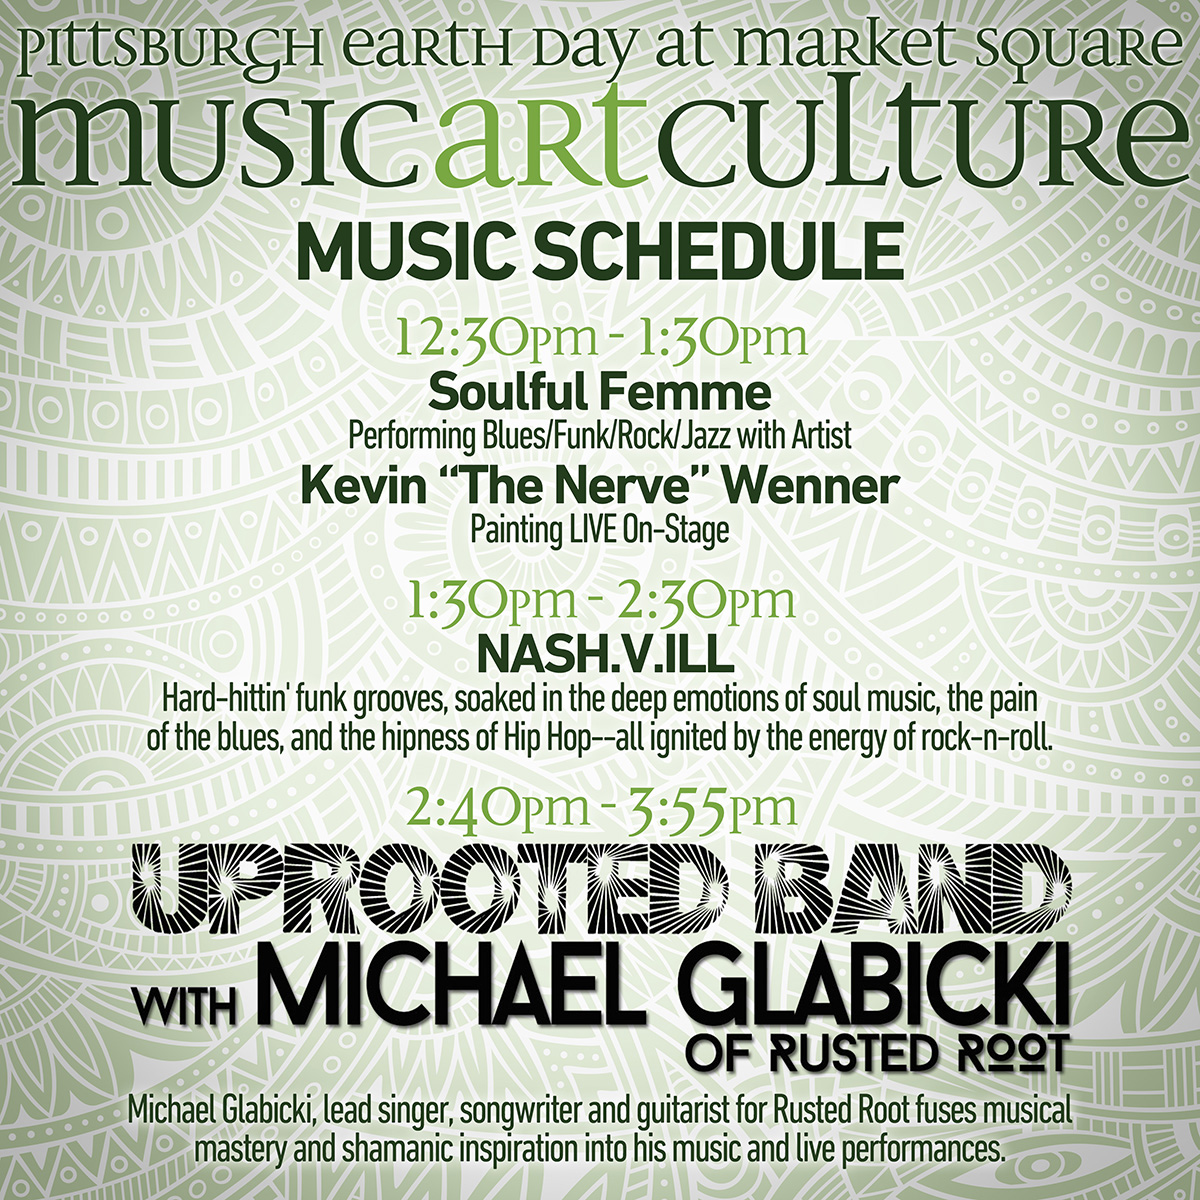 Music Schedule for the Pittsburgh Earth Day Music Art Culture Festival, starting at 12:30PM with Soulful Femme and Kevin "The Nerve" Wenner, followed by NASH.V.ILL at 1:30PM and the Uprooted Band with Michael Glacicki of Rusted Root at 2:40 PM